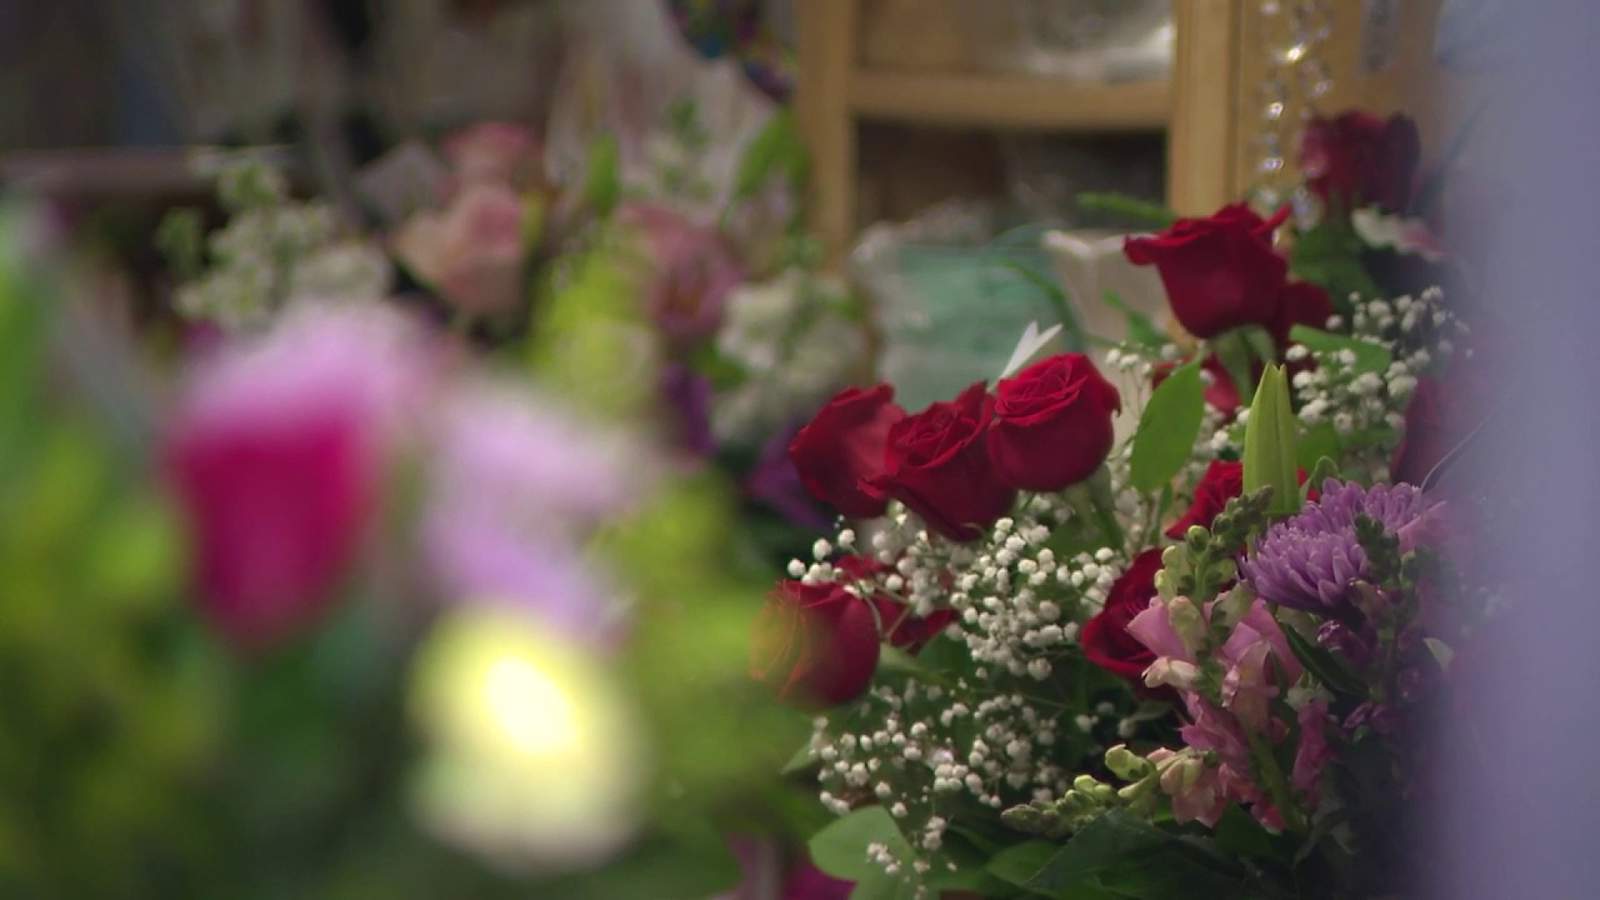 Local florists feeling impact of coronavirus pandemic with swarm of Mother’s Day orders